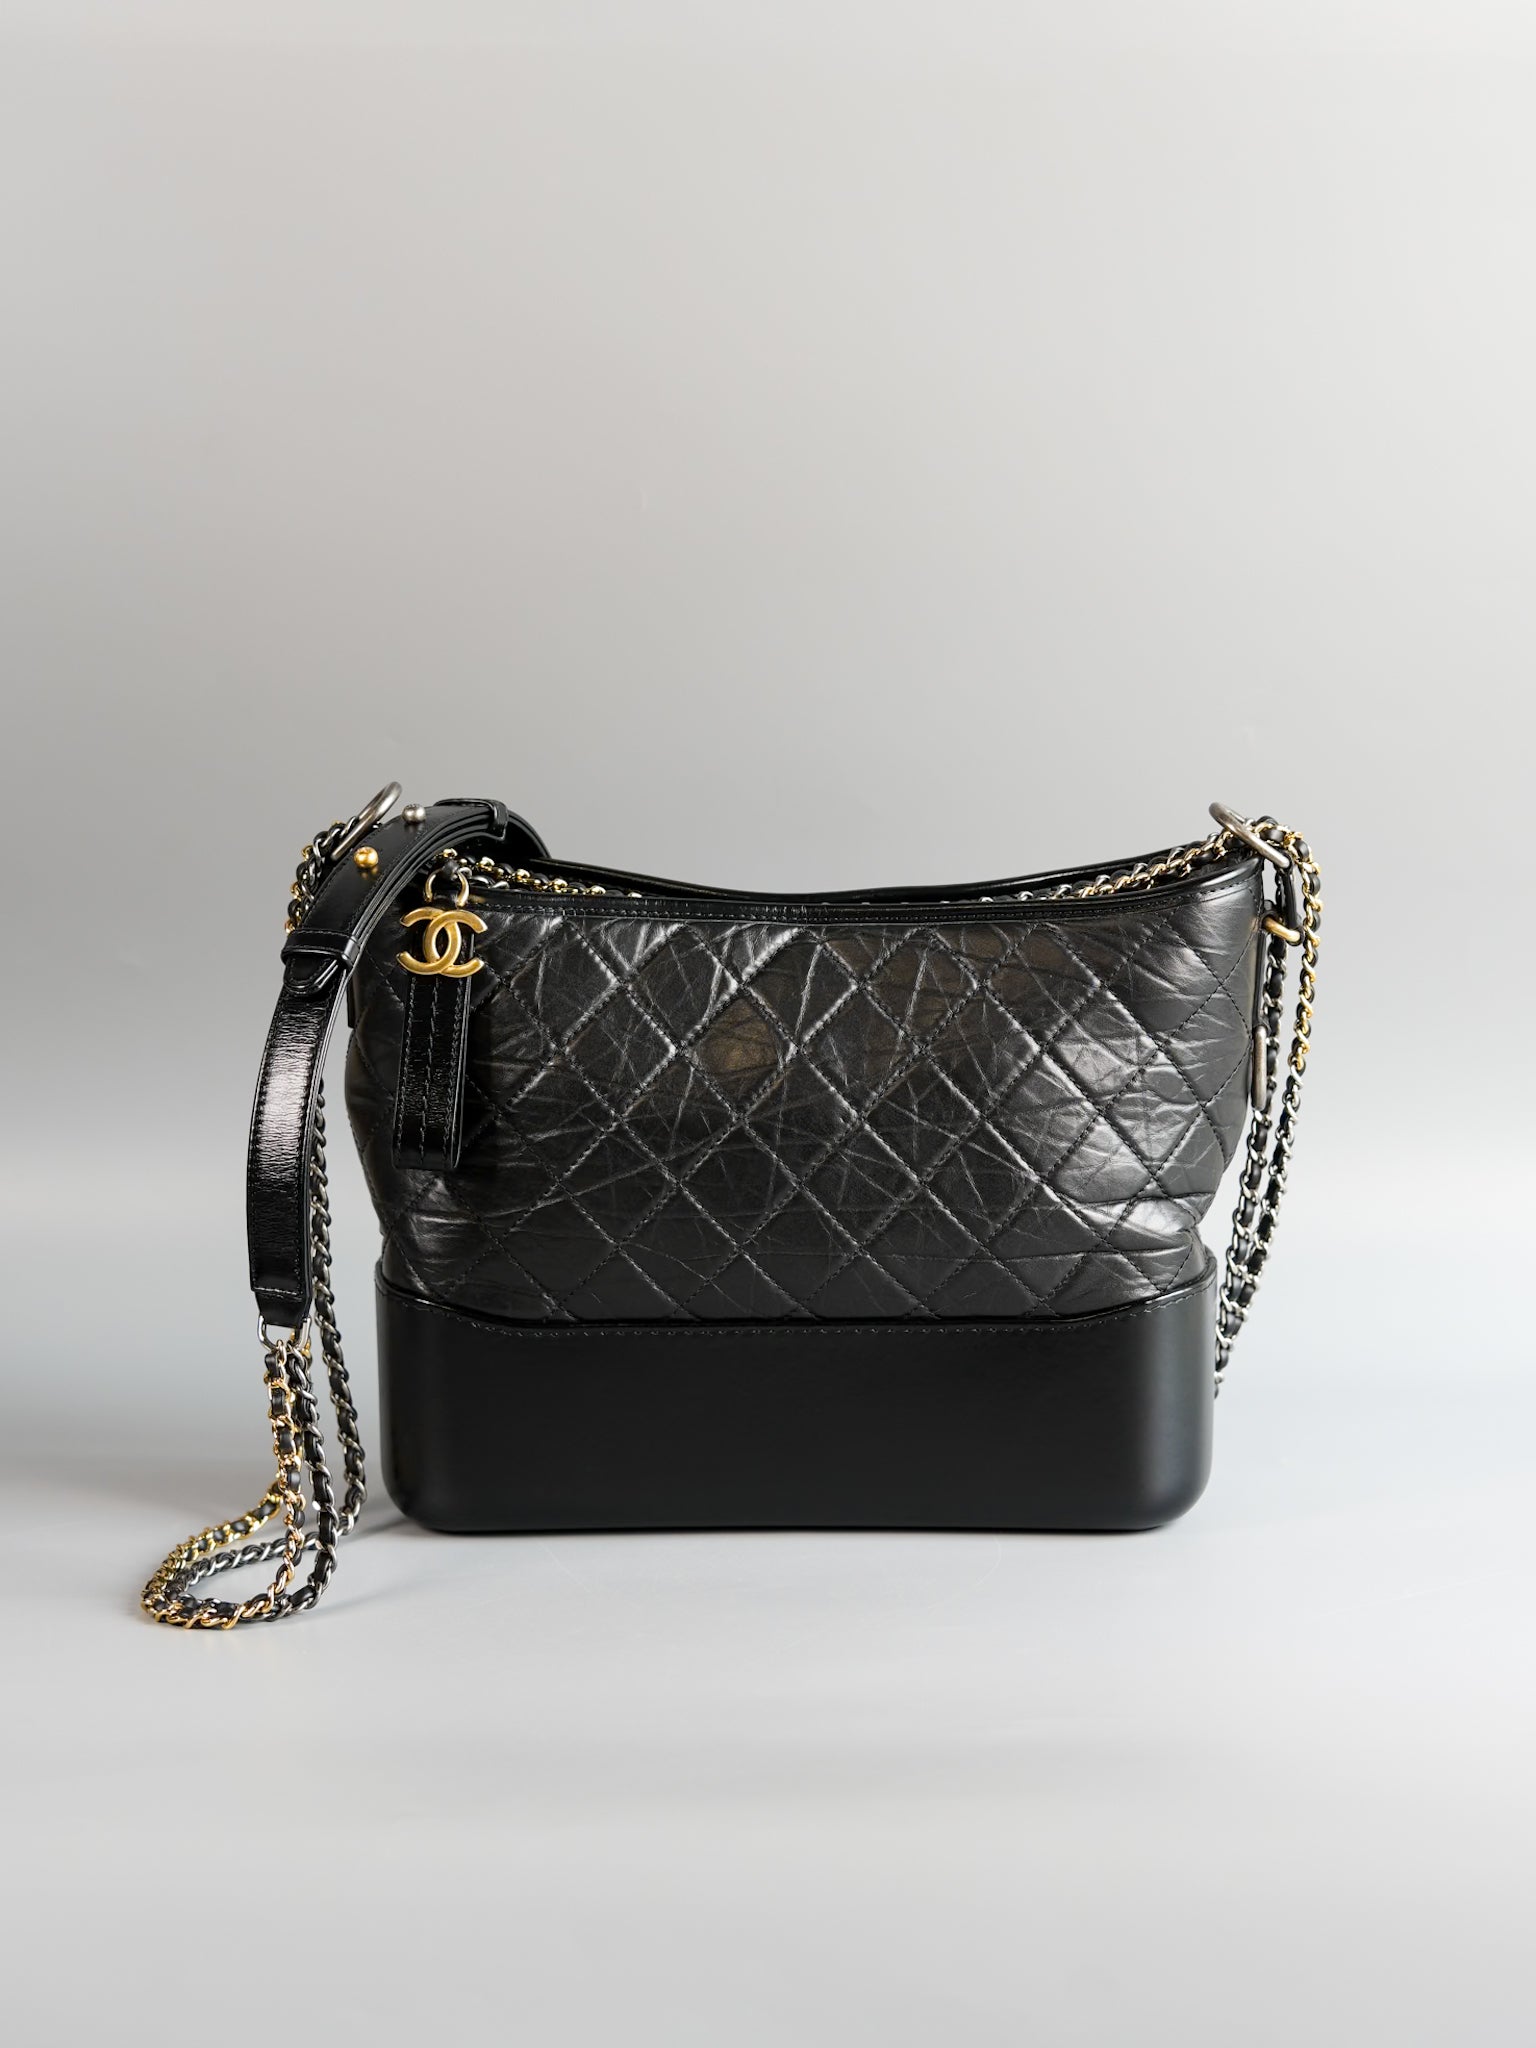 Gabrielle Hobo Old Medium (Large) in Black Quilted Distressed Calfskin & Mixed Hardware (Series 27) | Purse Maison Luxury Bags Shop